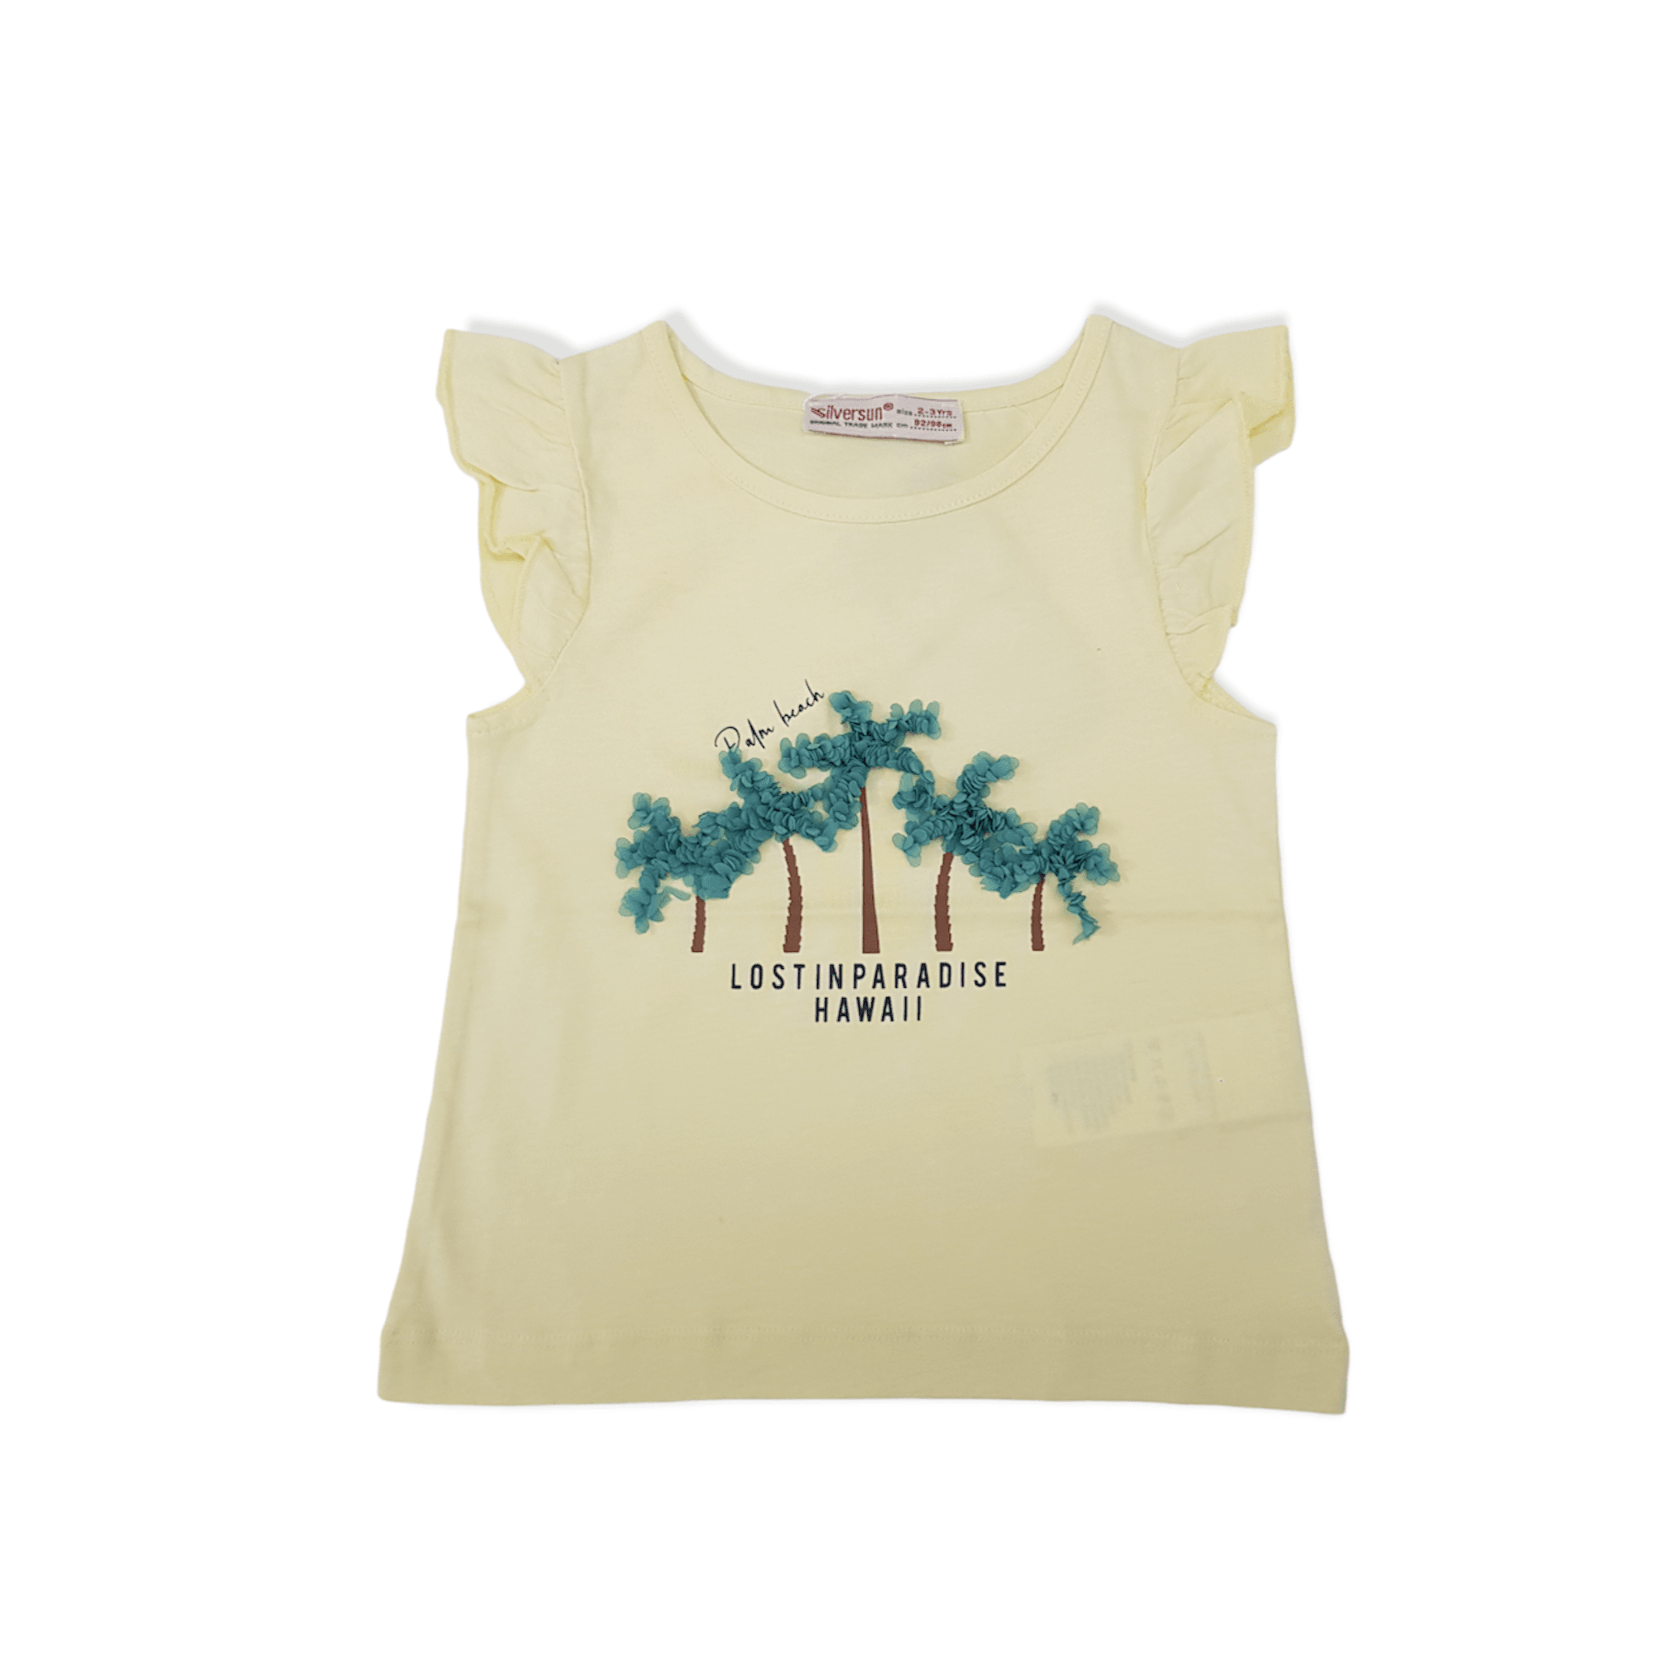 Lost in Paradise Girls T-shirt